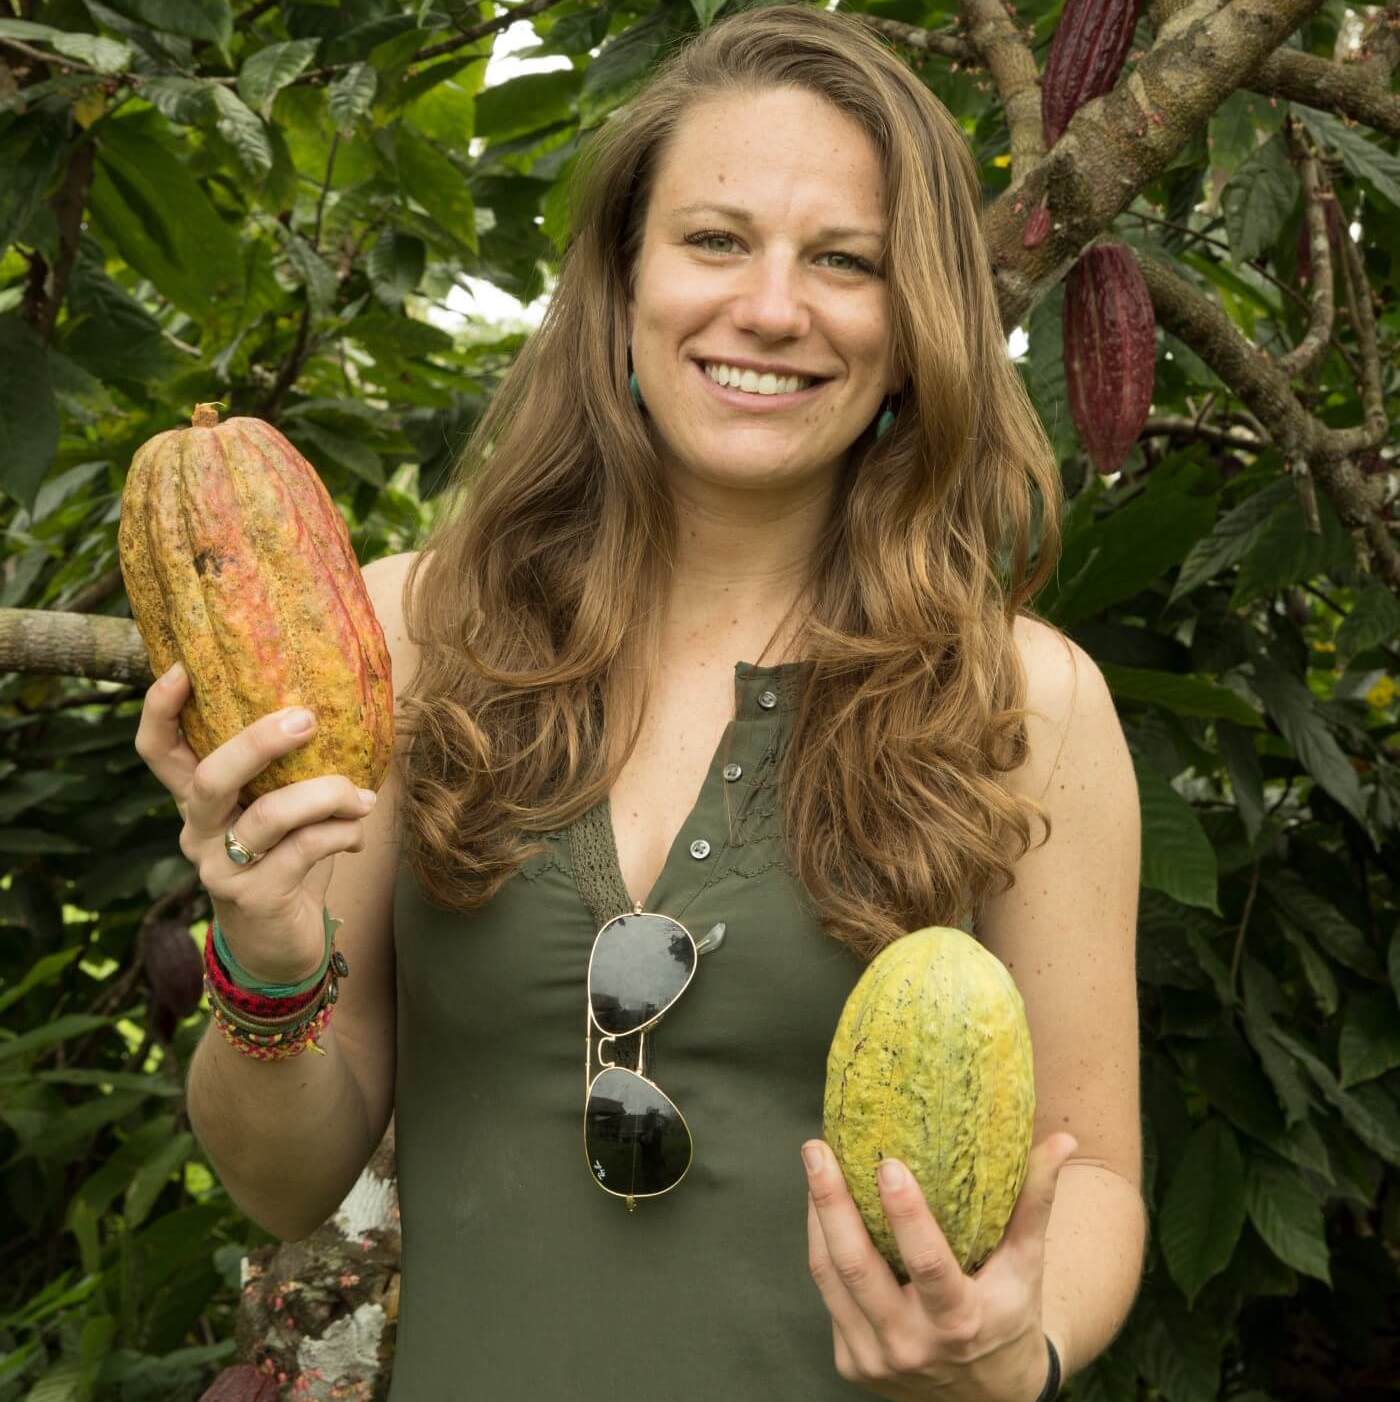 A woman smiling while holding cacao pods in front of trees